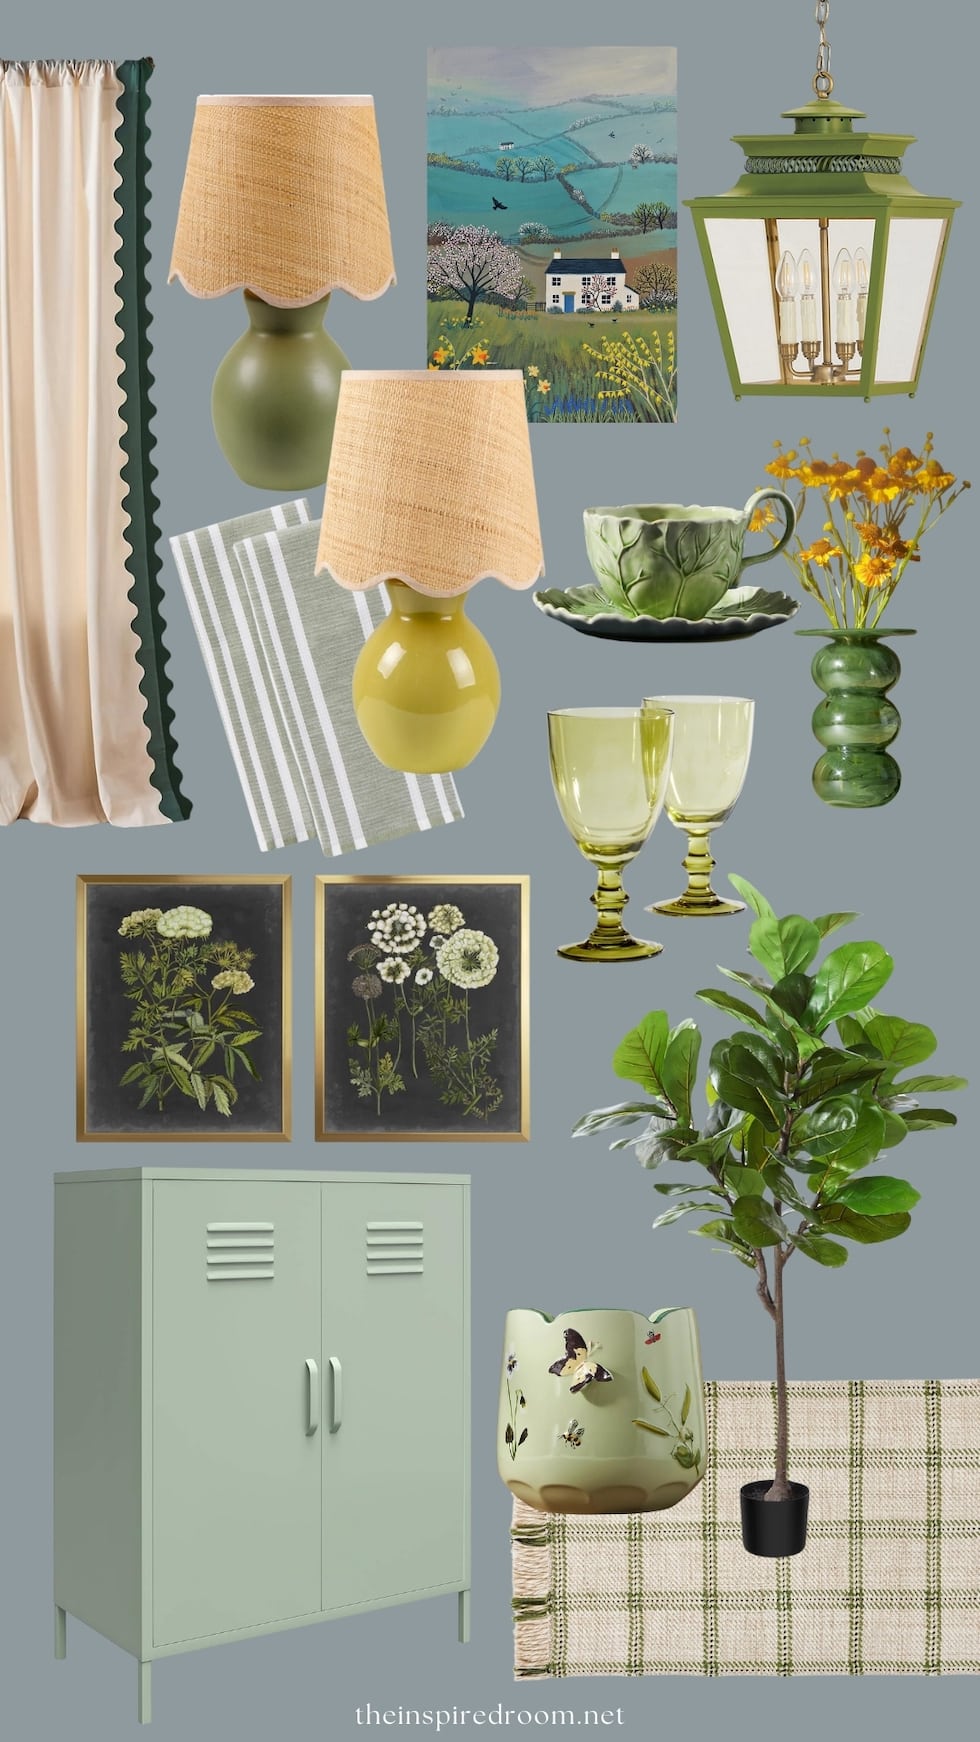 Interior Design Mood Boards by The Inspired Room